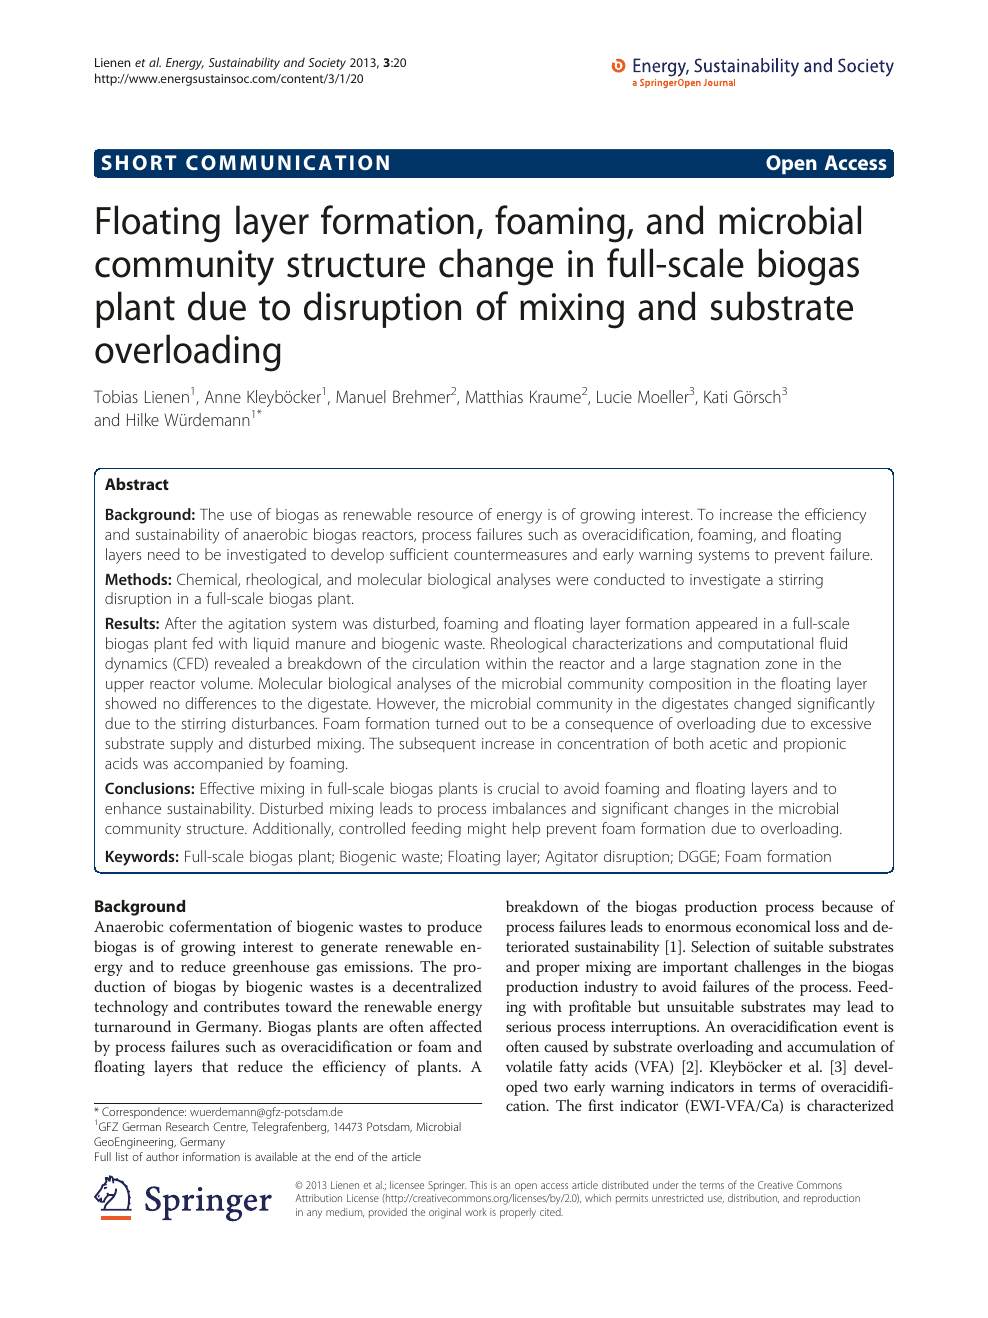 Floating layer formation, foaming, and microbial community structure change  in full-scale biogas plant due to disruption of mixing and substrate  overloading – topic of research paper in Environmental engineering.  Download scholarly article